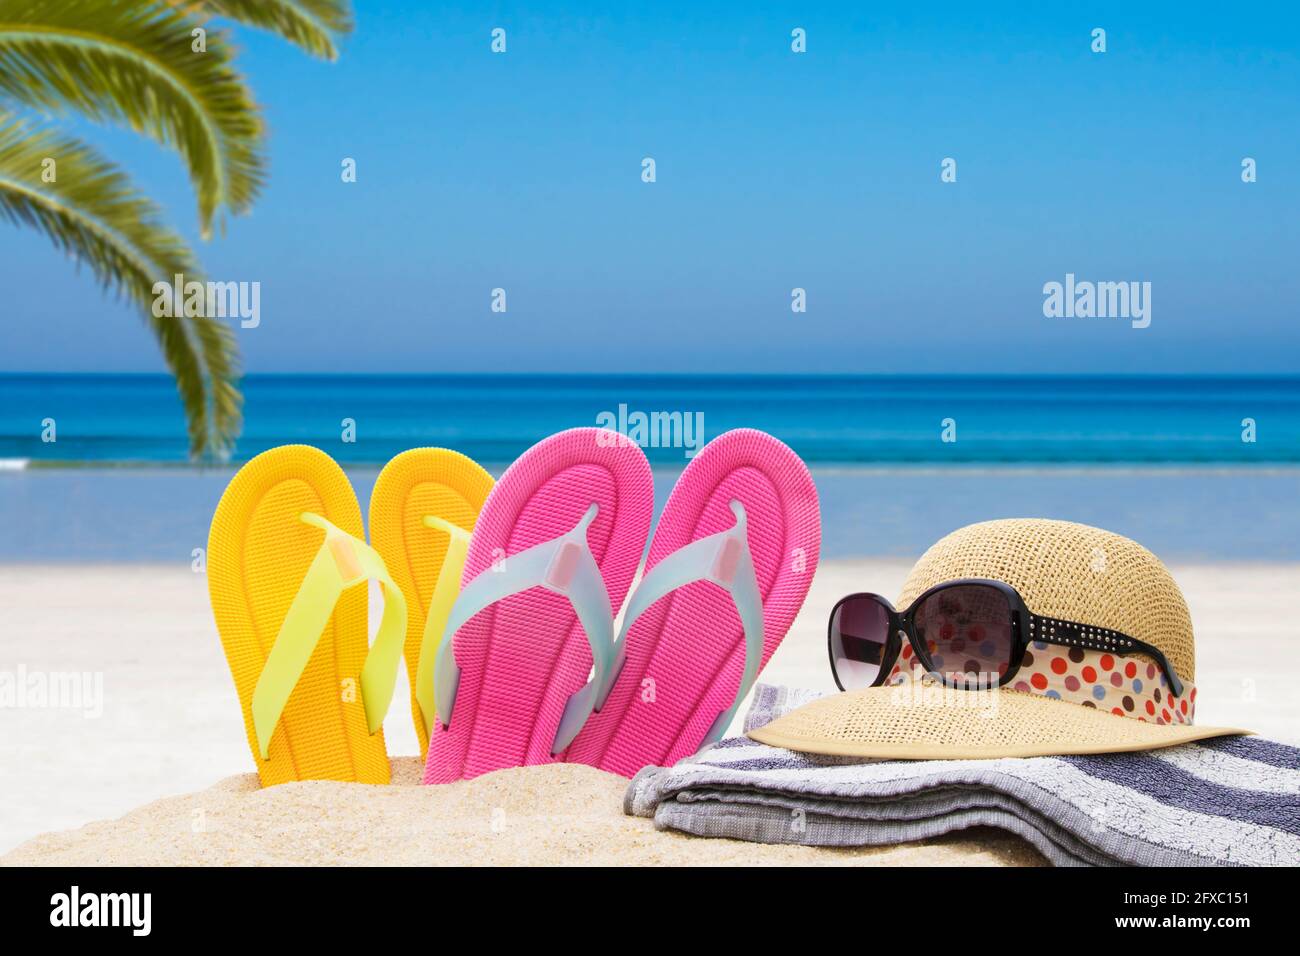 sandals on the beach, holiday and summer concept Stock Photo